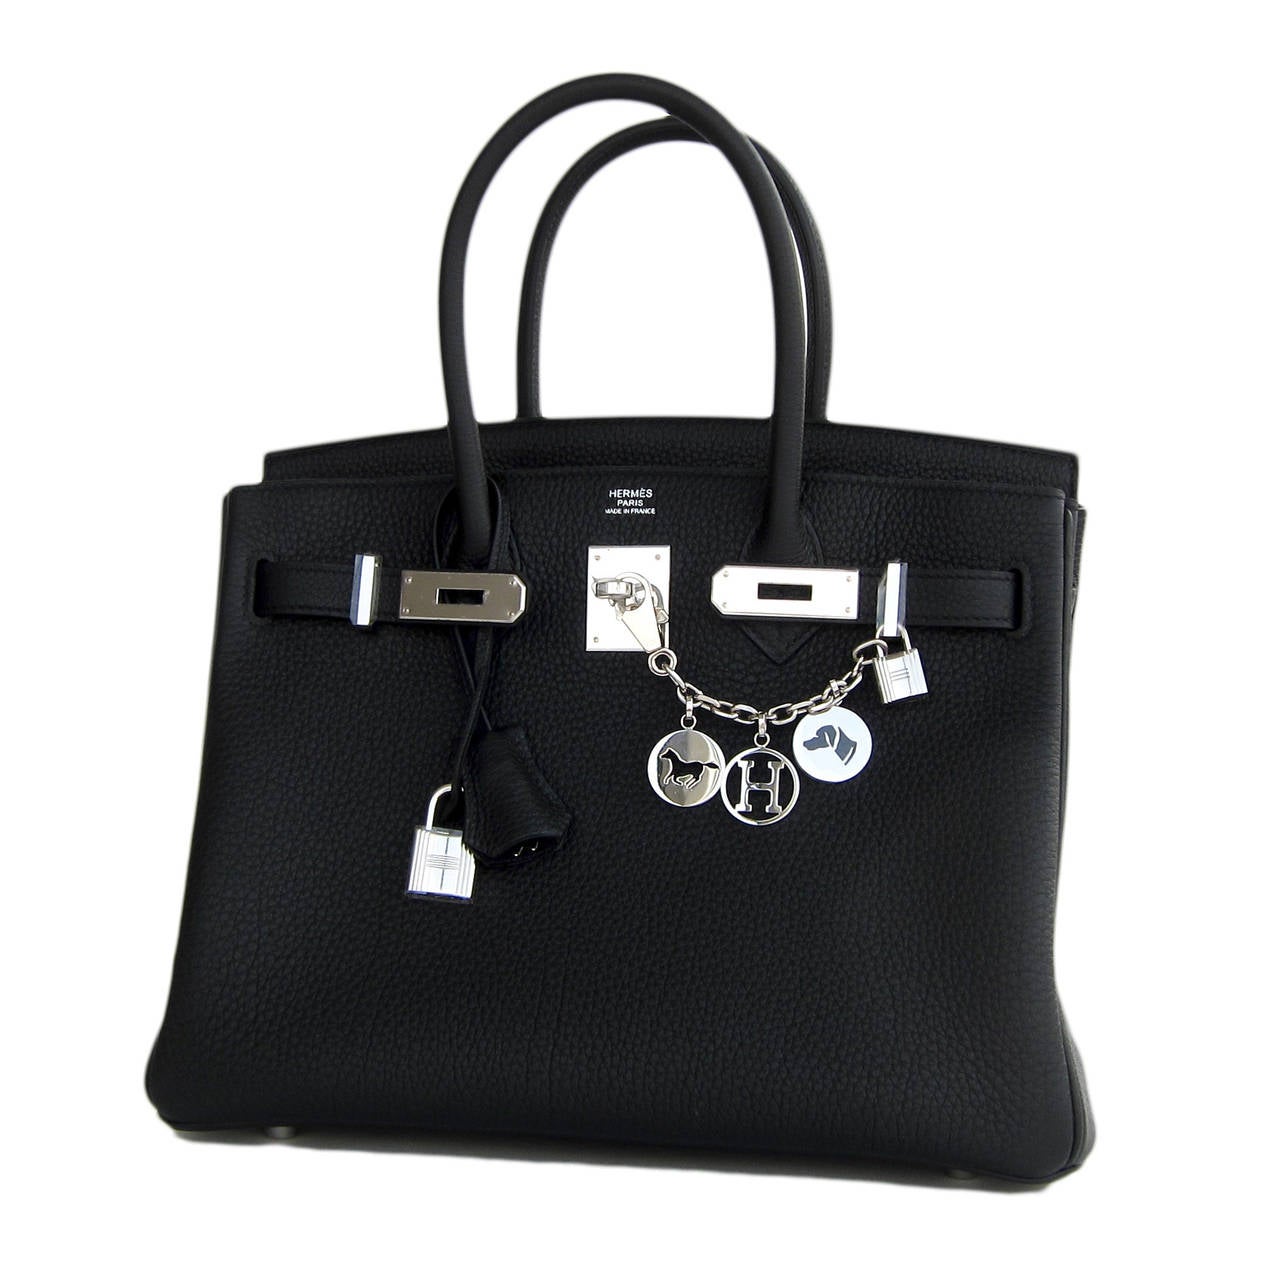 Hermes Black Togo 30cm Birkin Palladium PHW Tote Satchel Leather Bag

Brand New in Box- Store Fresh
T stamp purchased directly from Hermes store in 2015
Comes with keys, lock, clochette, a sleeper for the bag, rain protector, Hermes ribbon, and